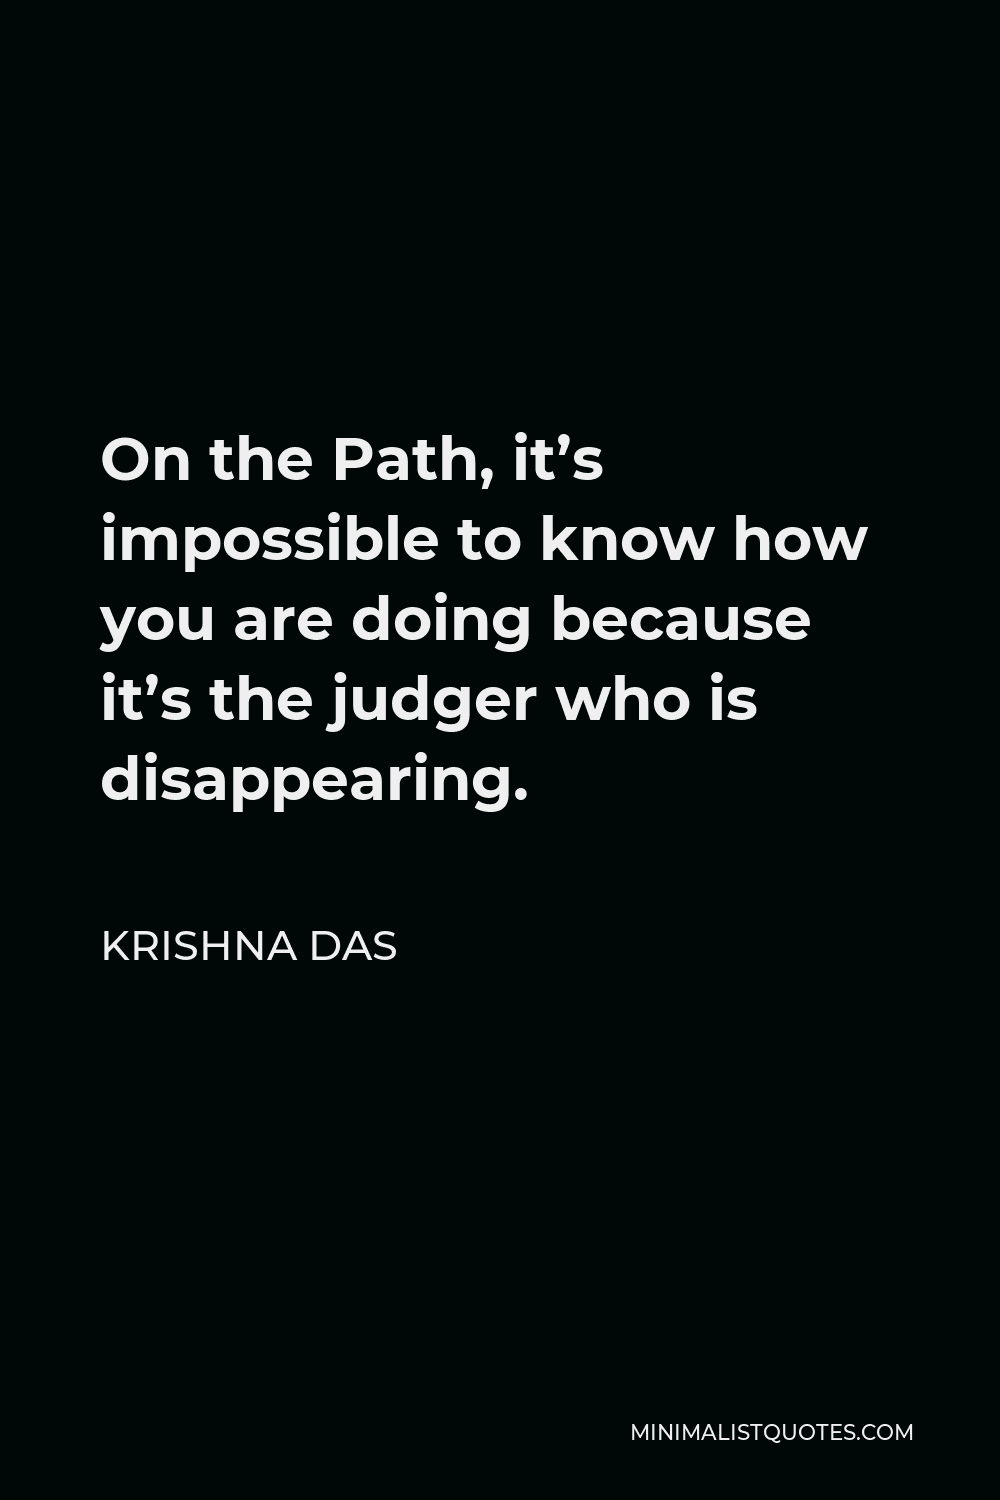 Krishna Das Quote - On the Path, it’s impossible to know how you are doing because it’s the judger who is disappearing.